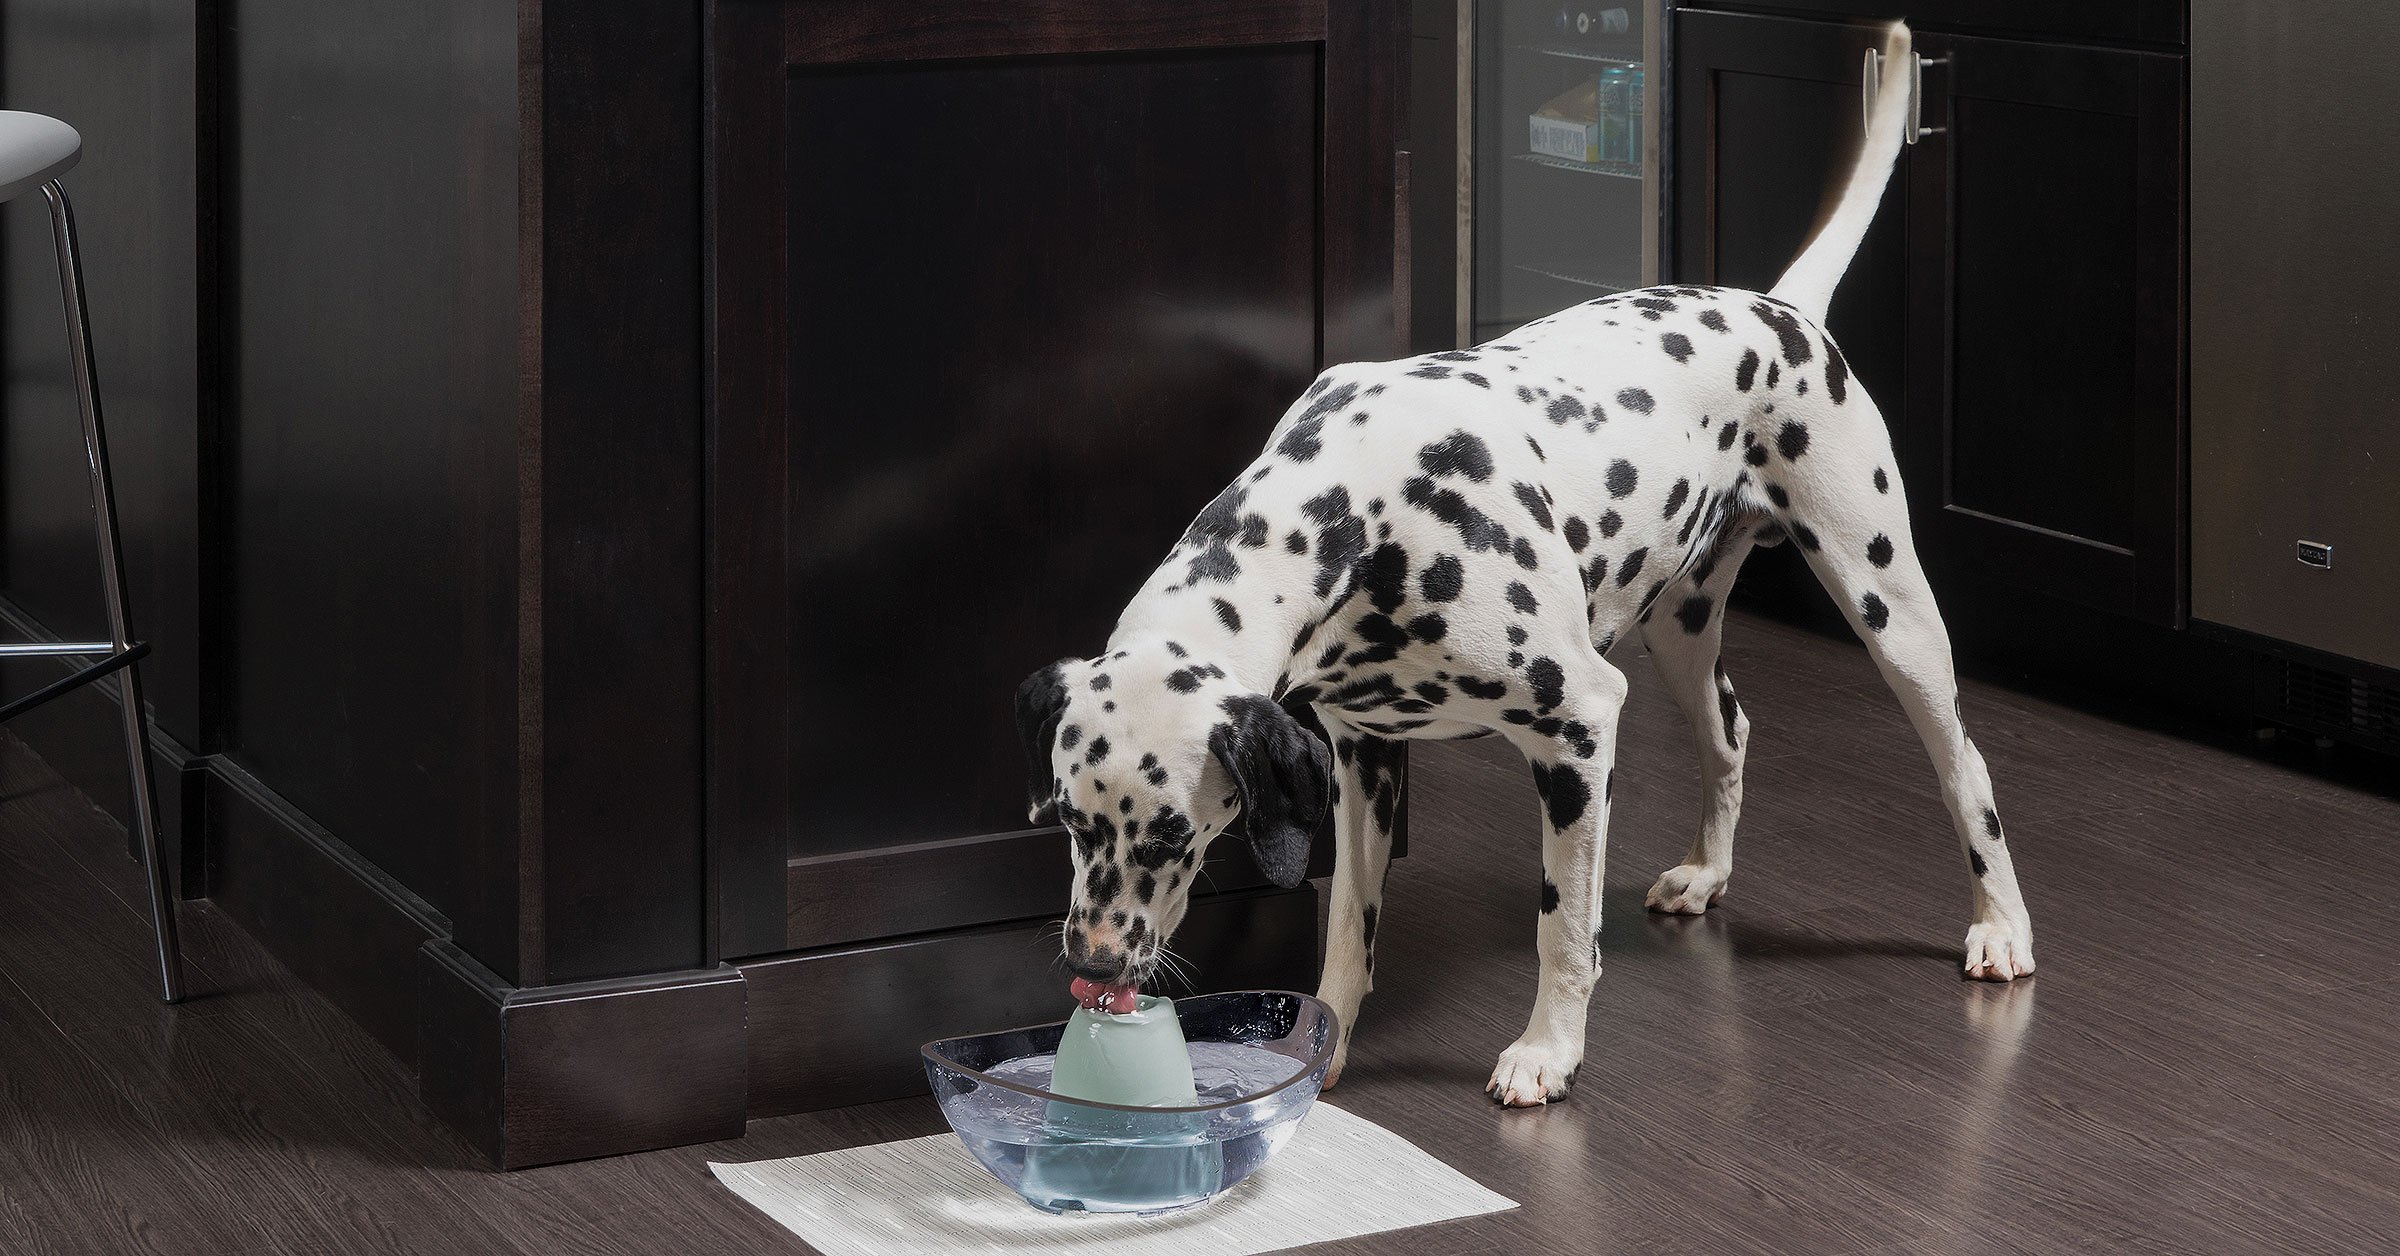 Happy dog drinking flowing water from glass ...</div>
					</div>
					
										
									  
					<div class=